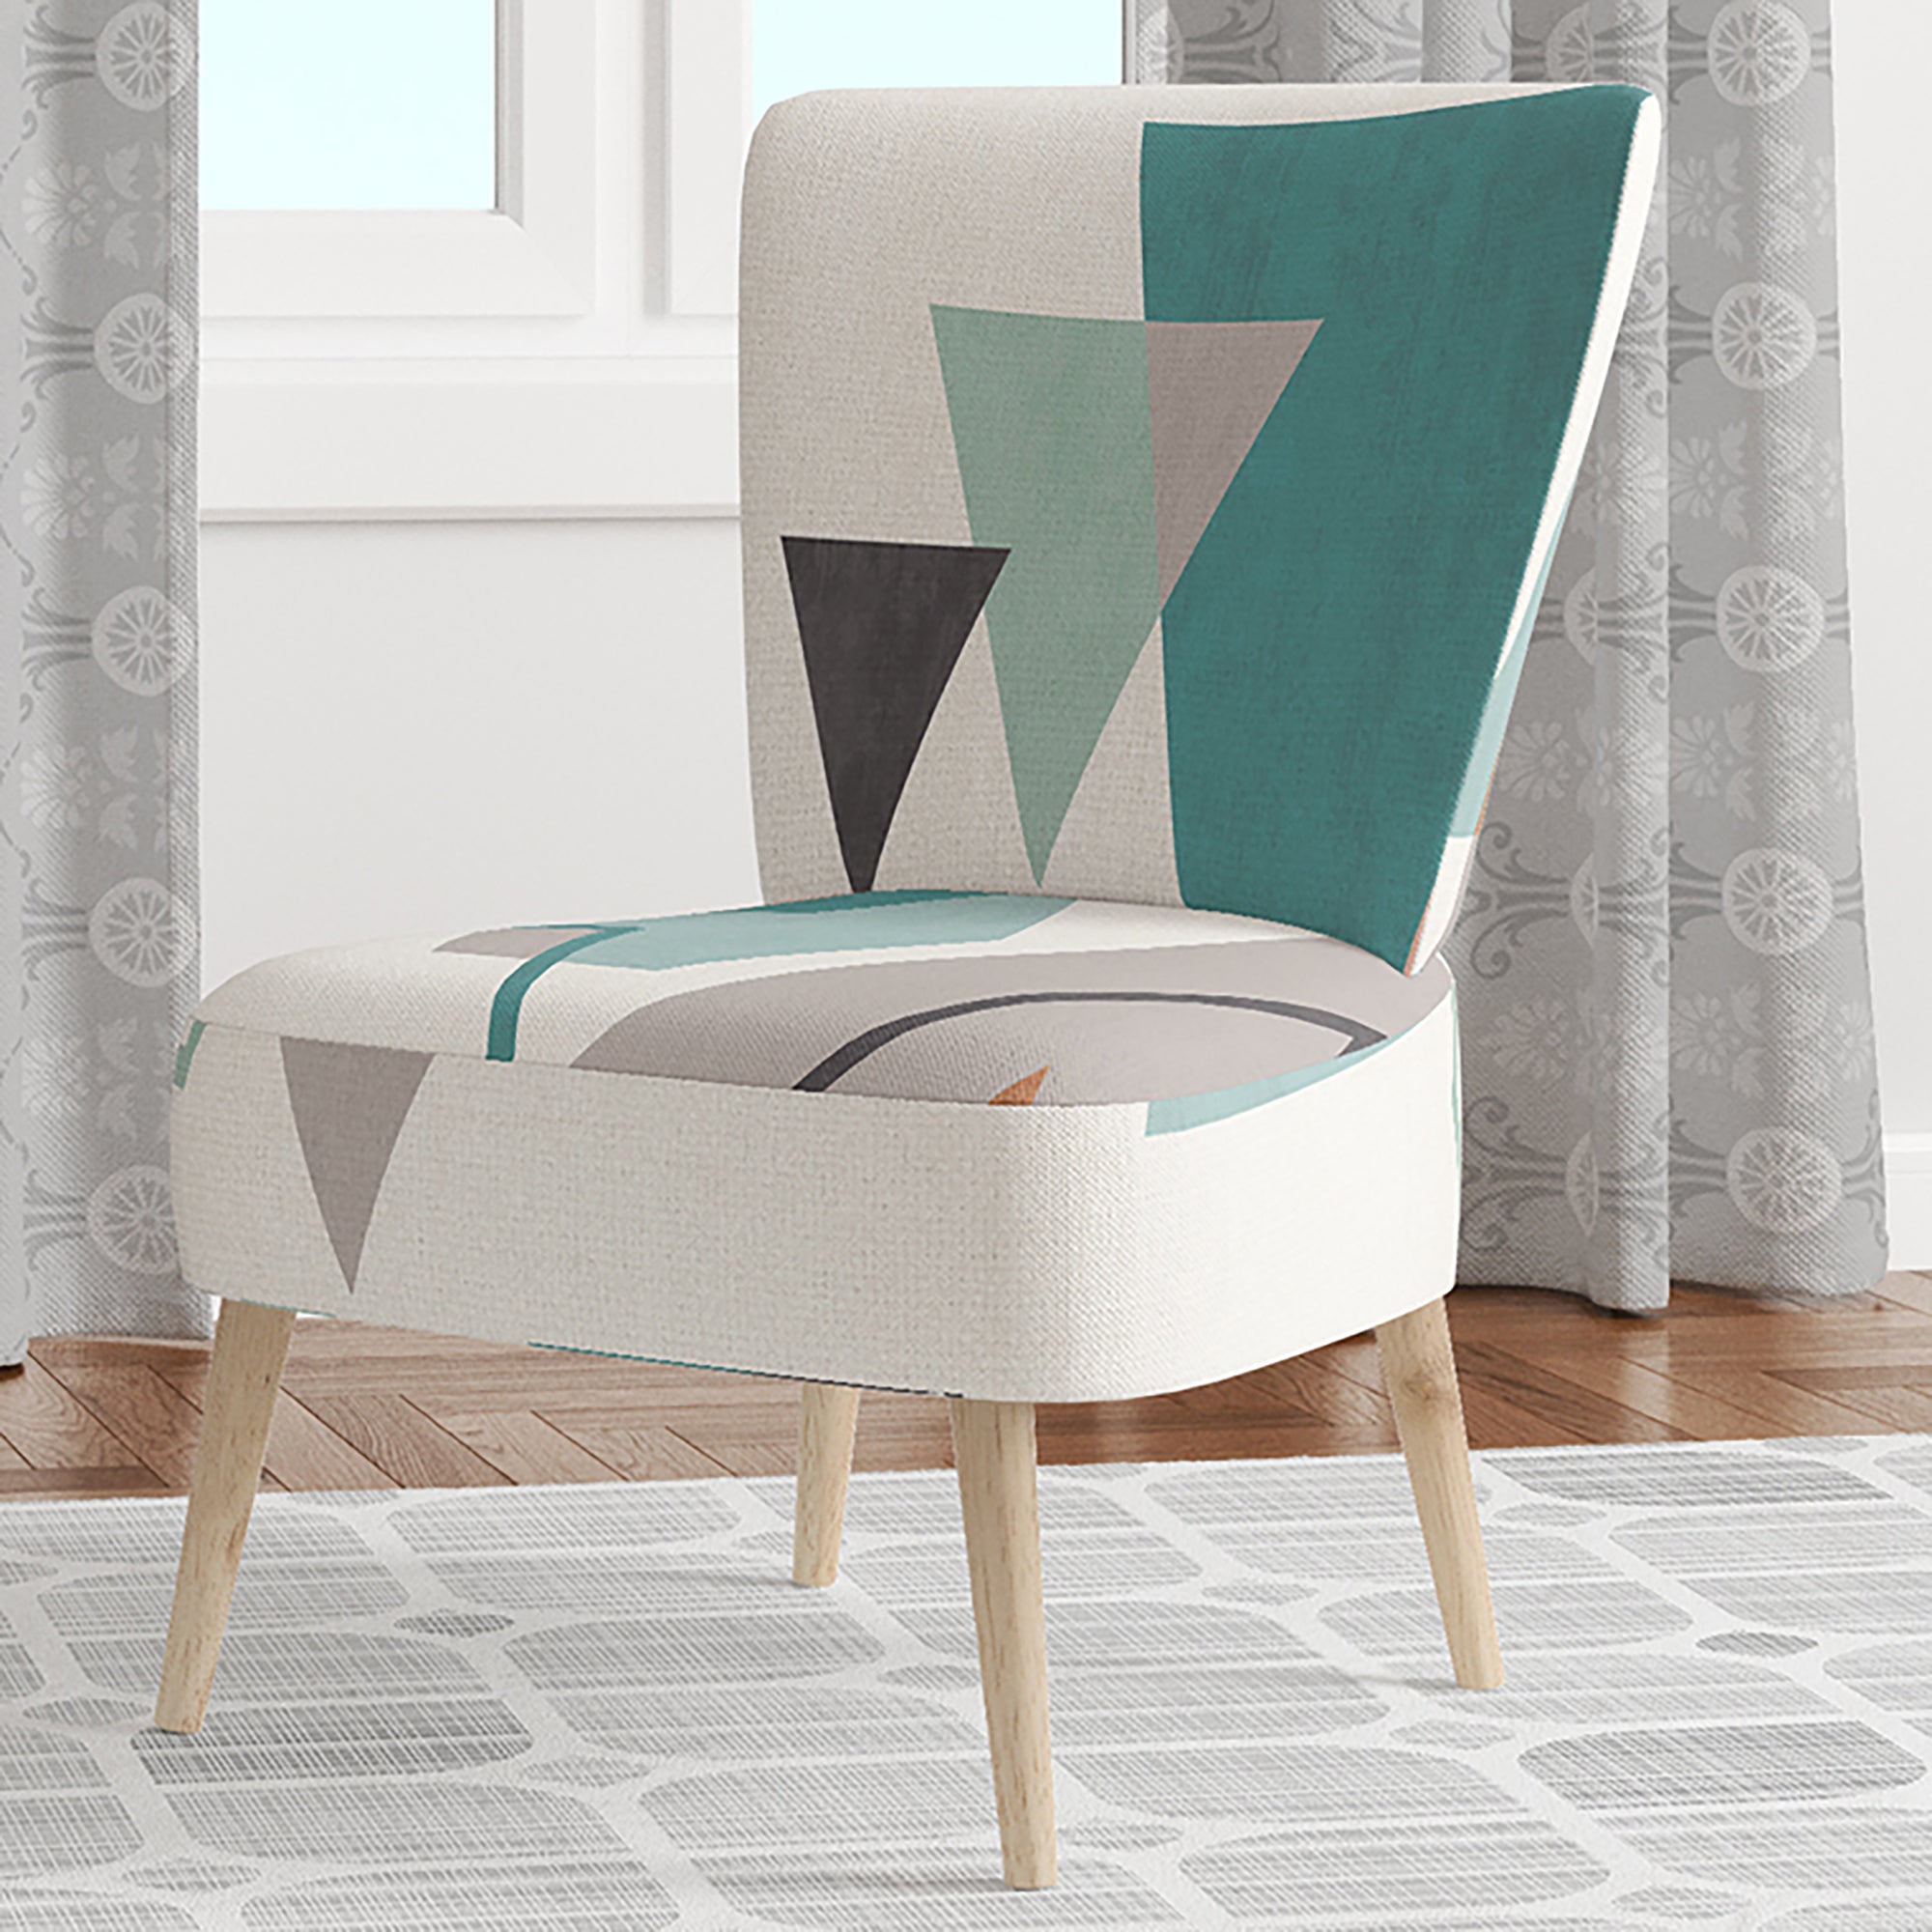 Geometric hexagons Pattern VI Transitional Accent Chair